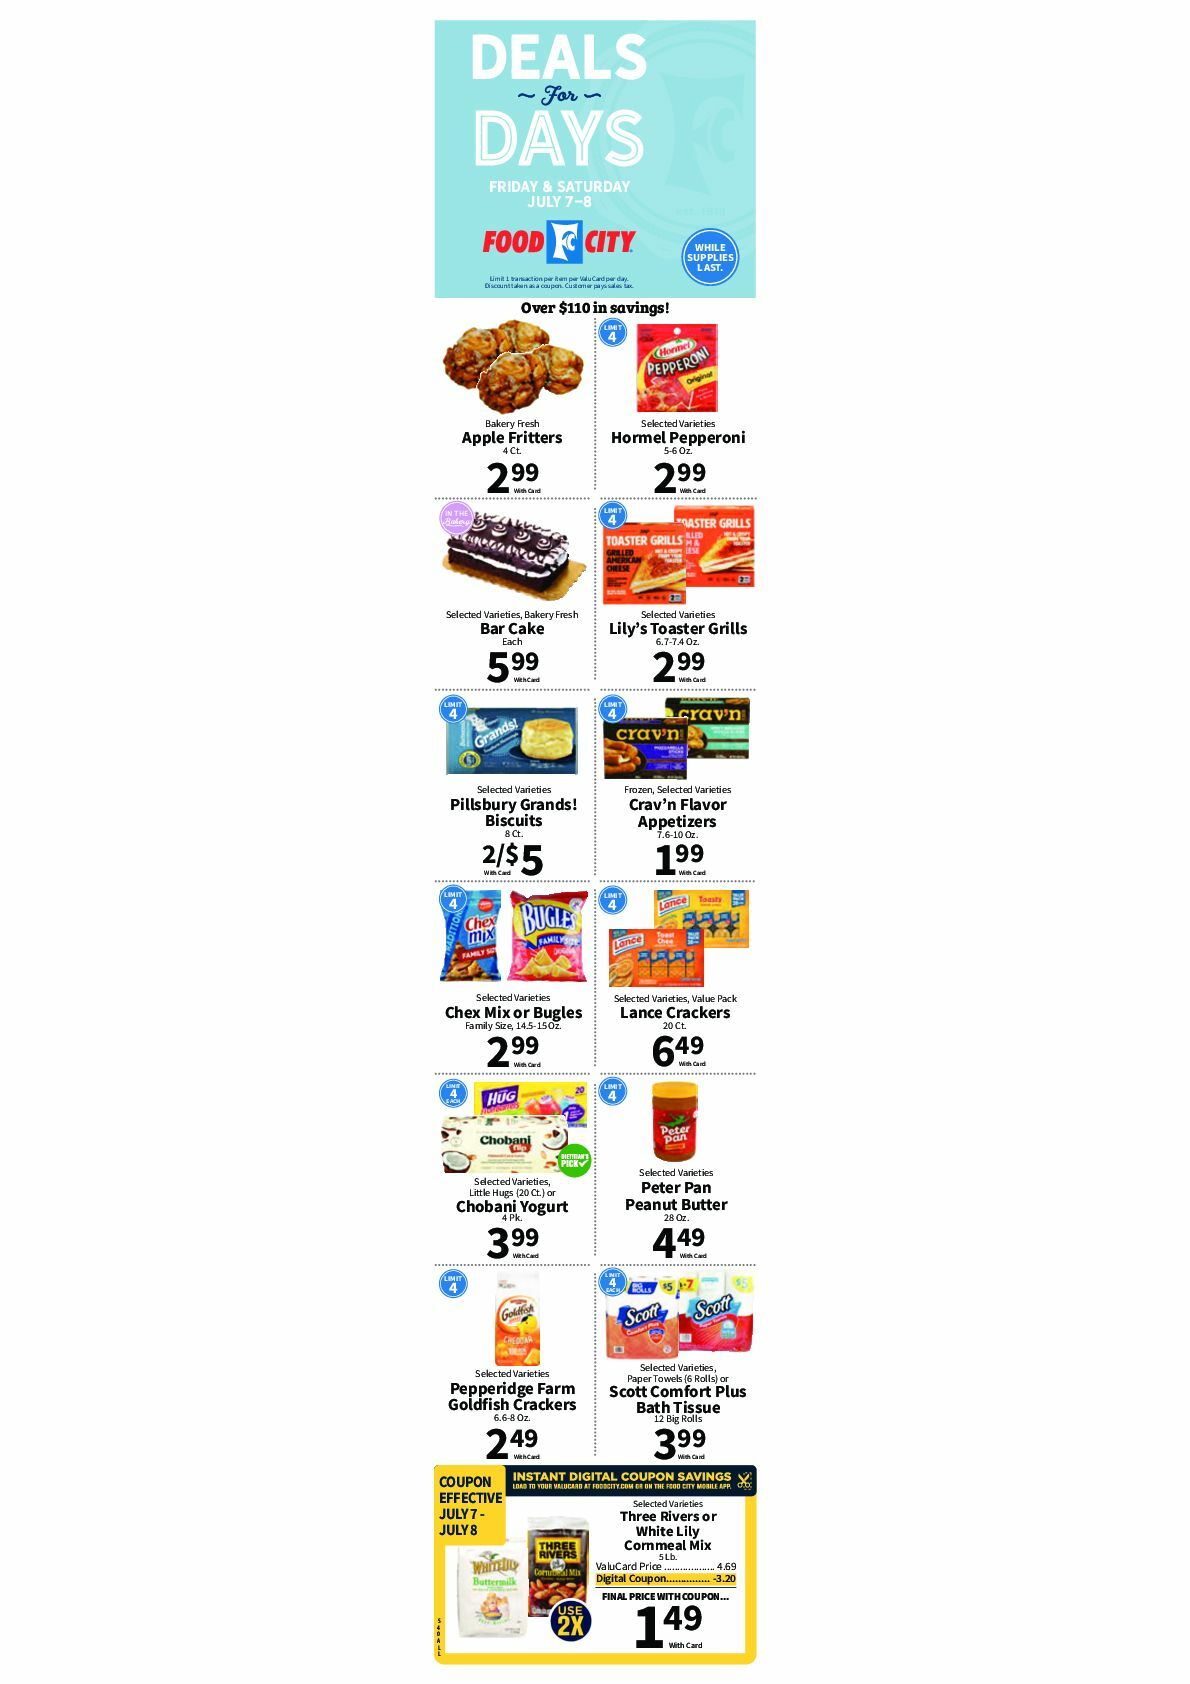 Food City Deals For Days Weekly Ad from July 7